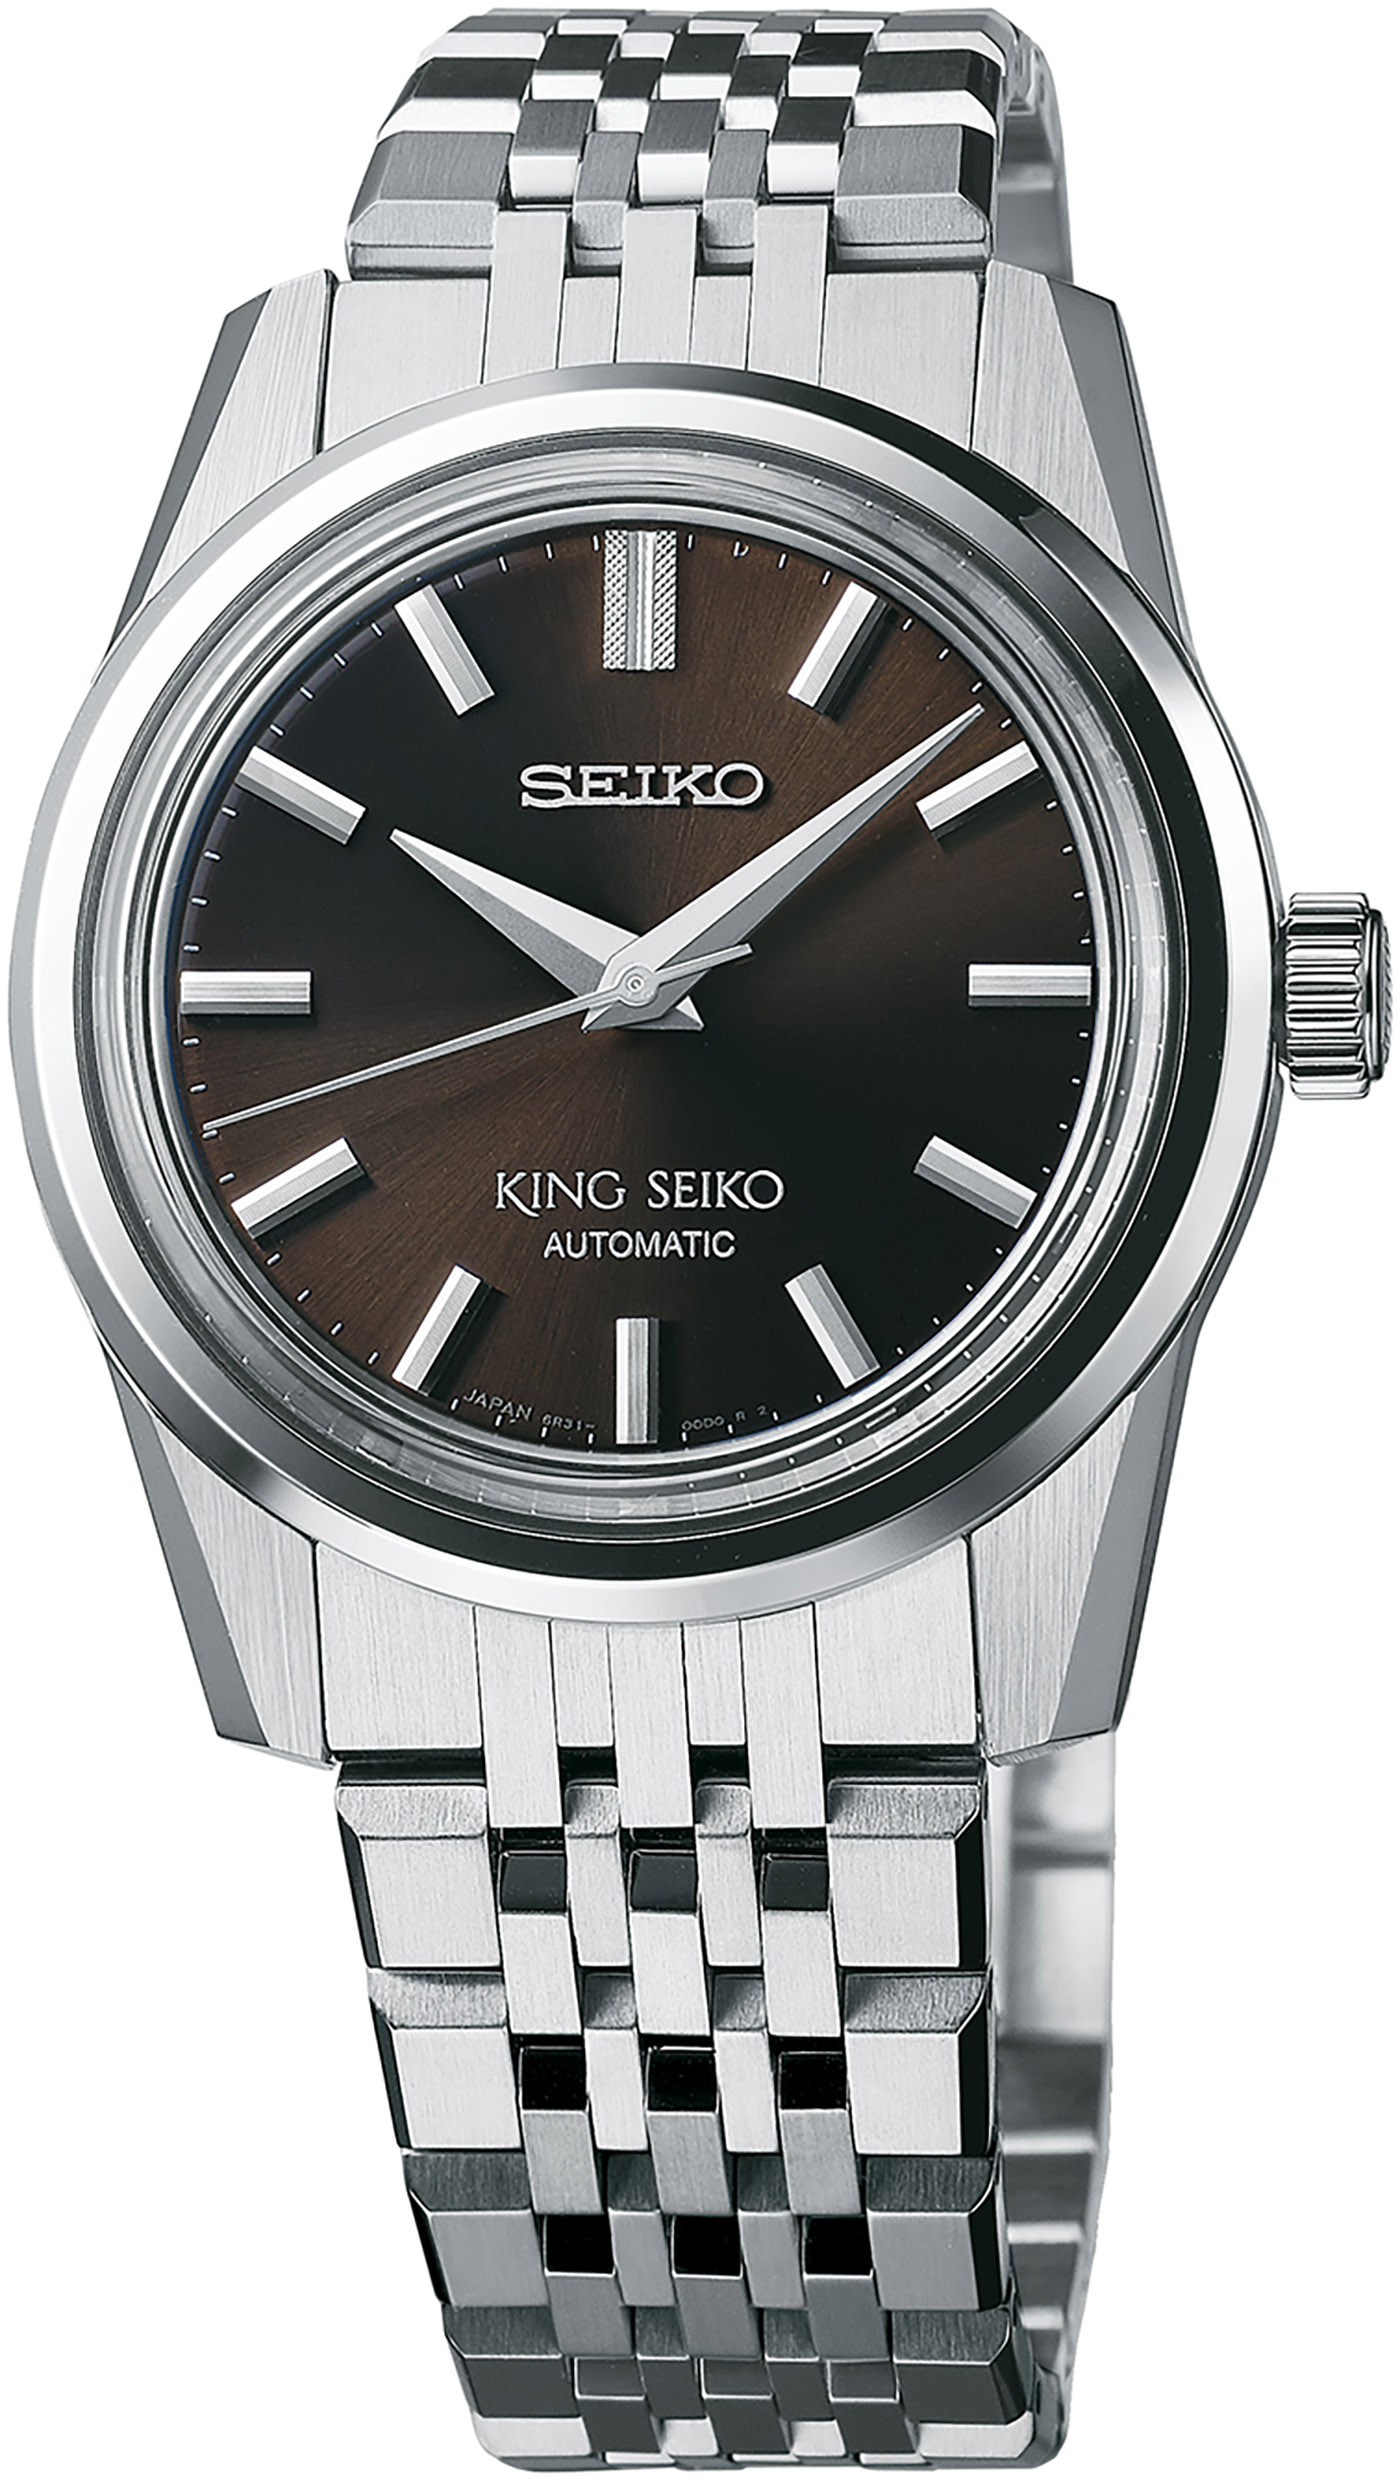 Seiko Restores The King Seiko Collection With Five New Watches 